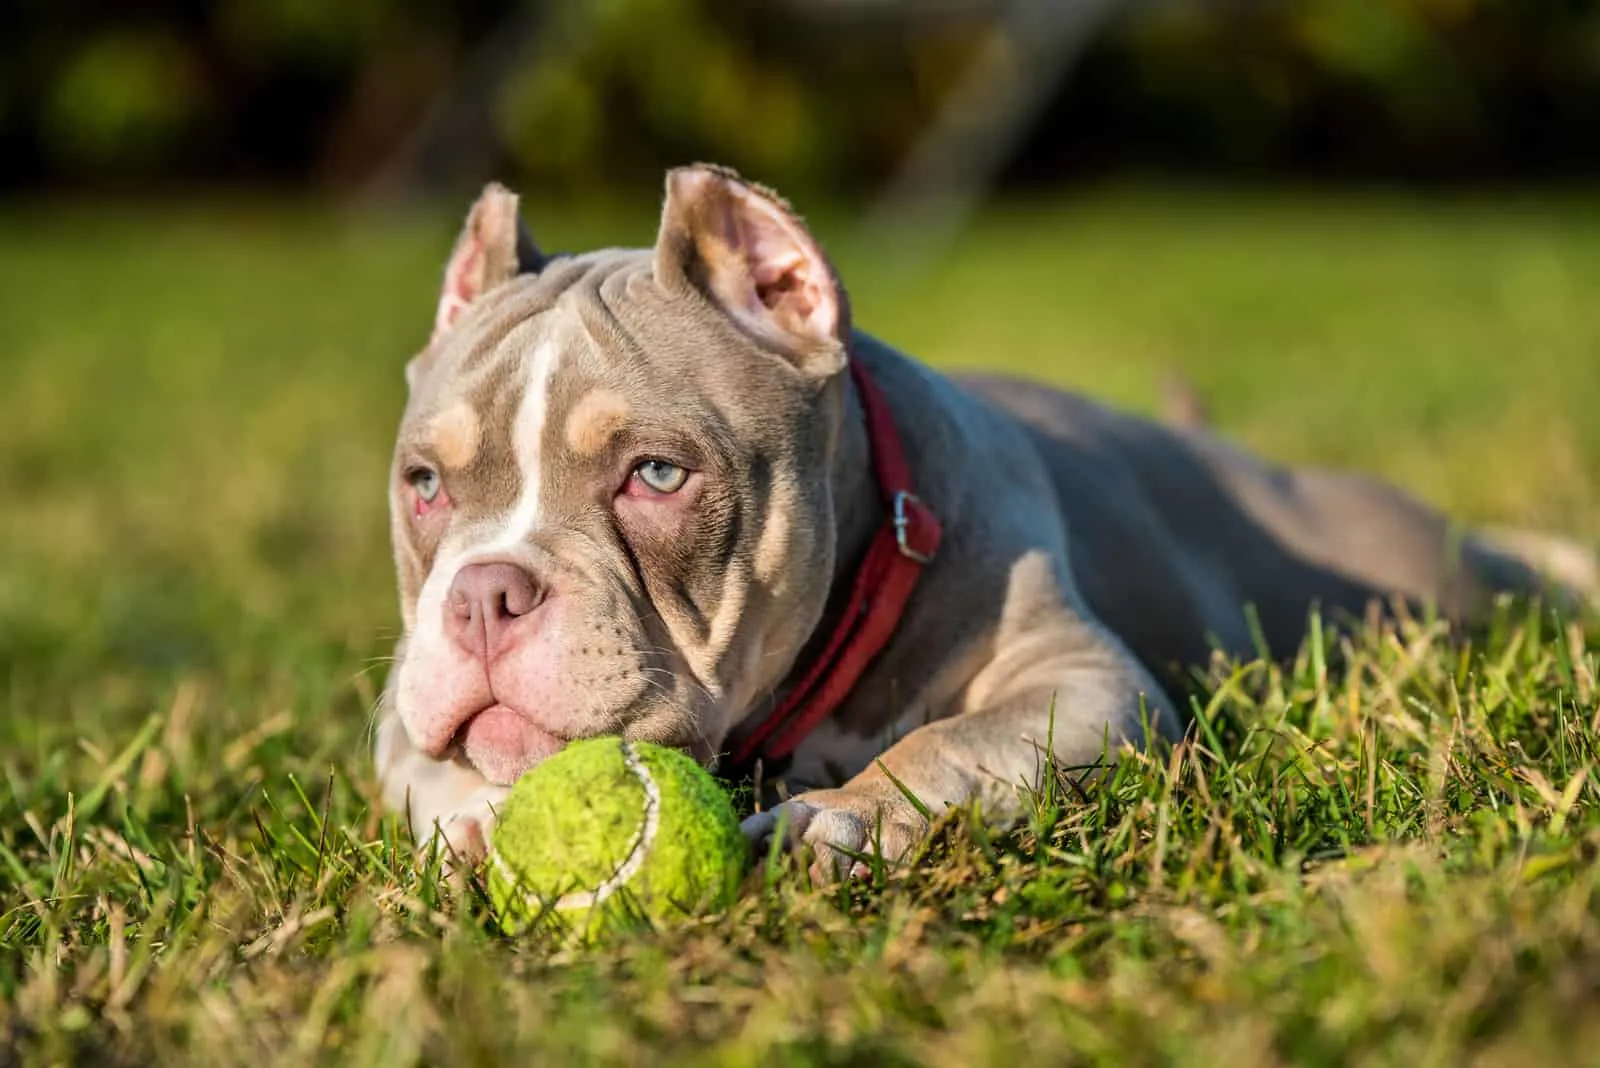 pocket american bully lying in grass with tennis ball